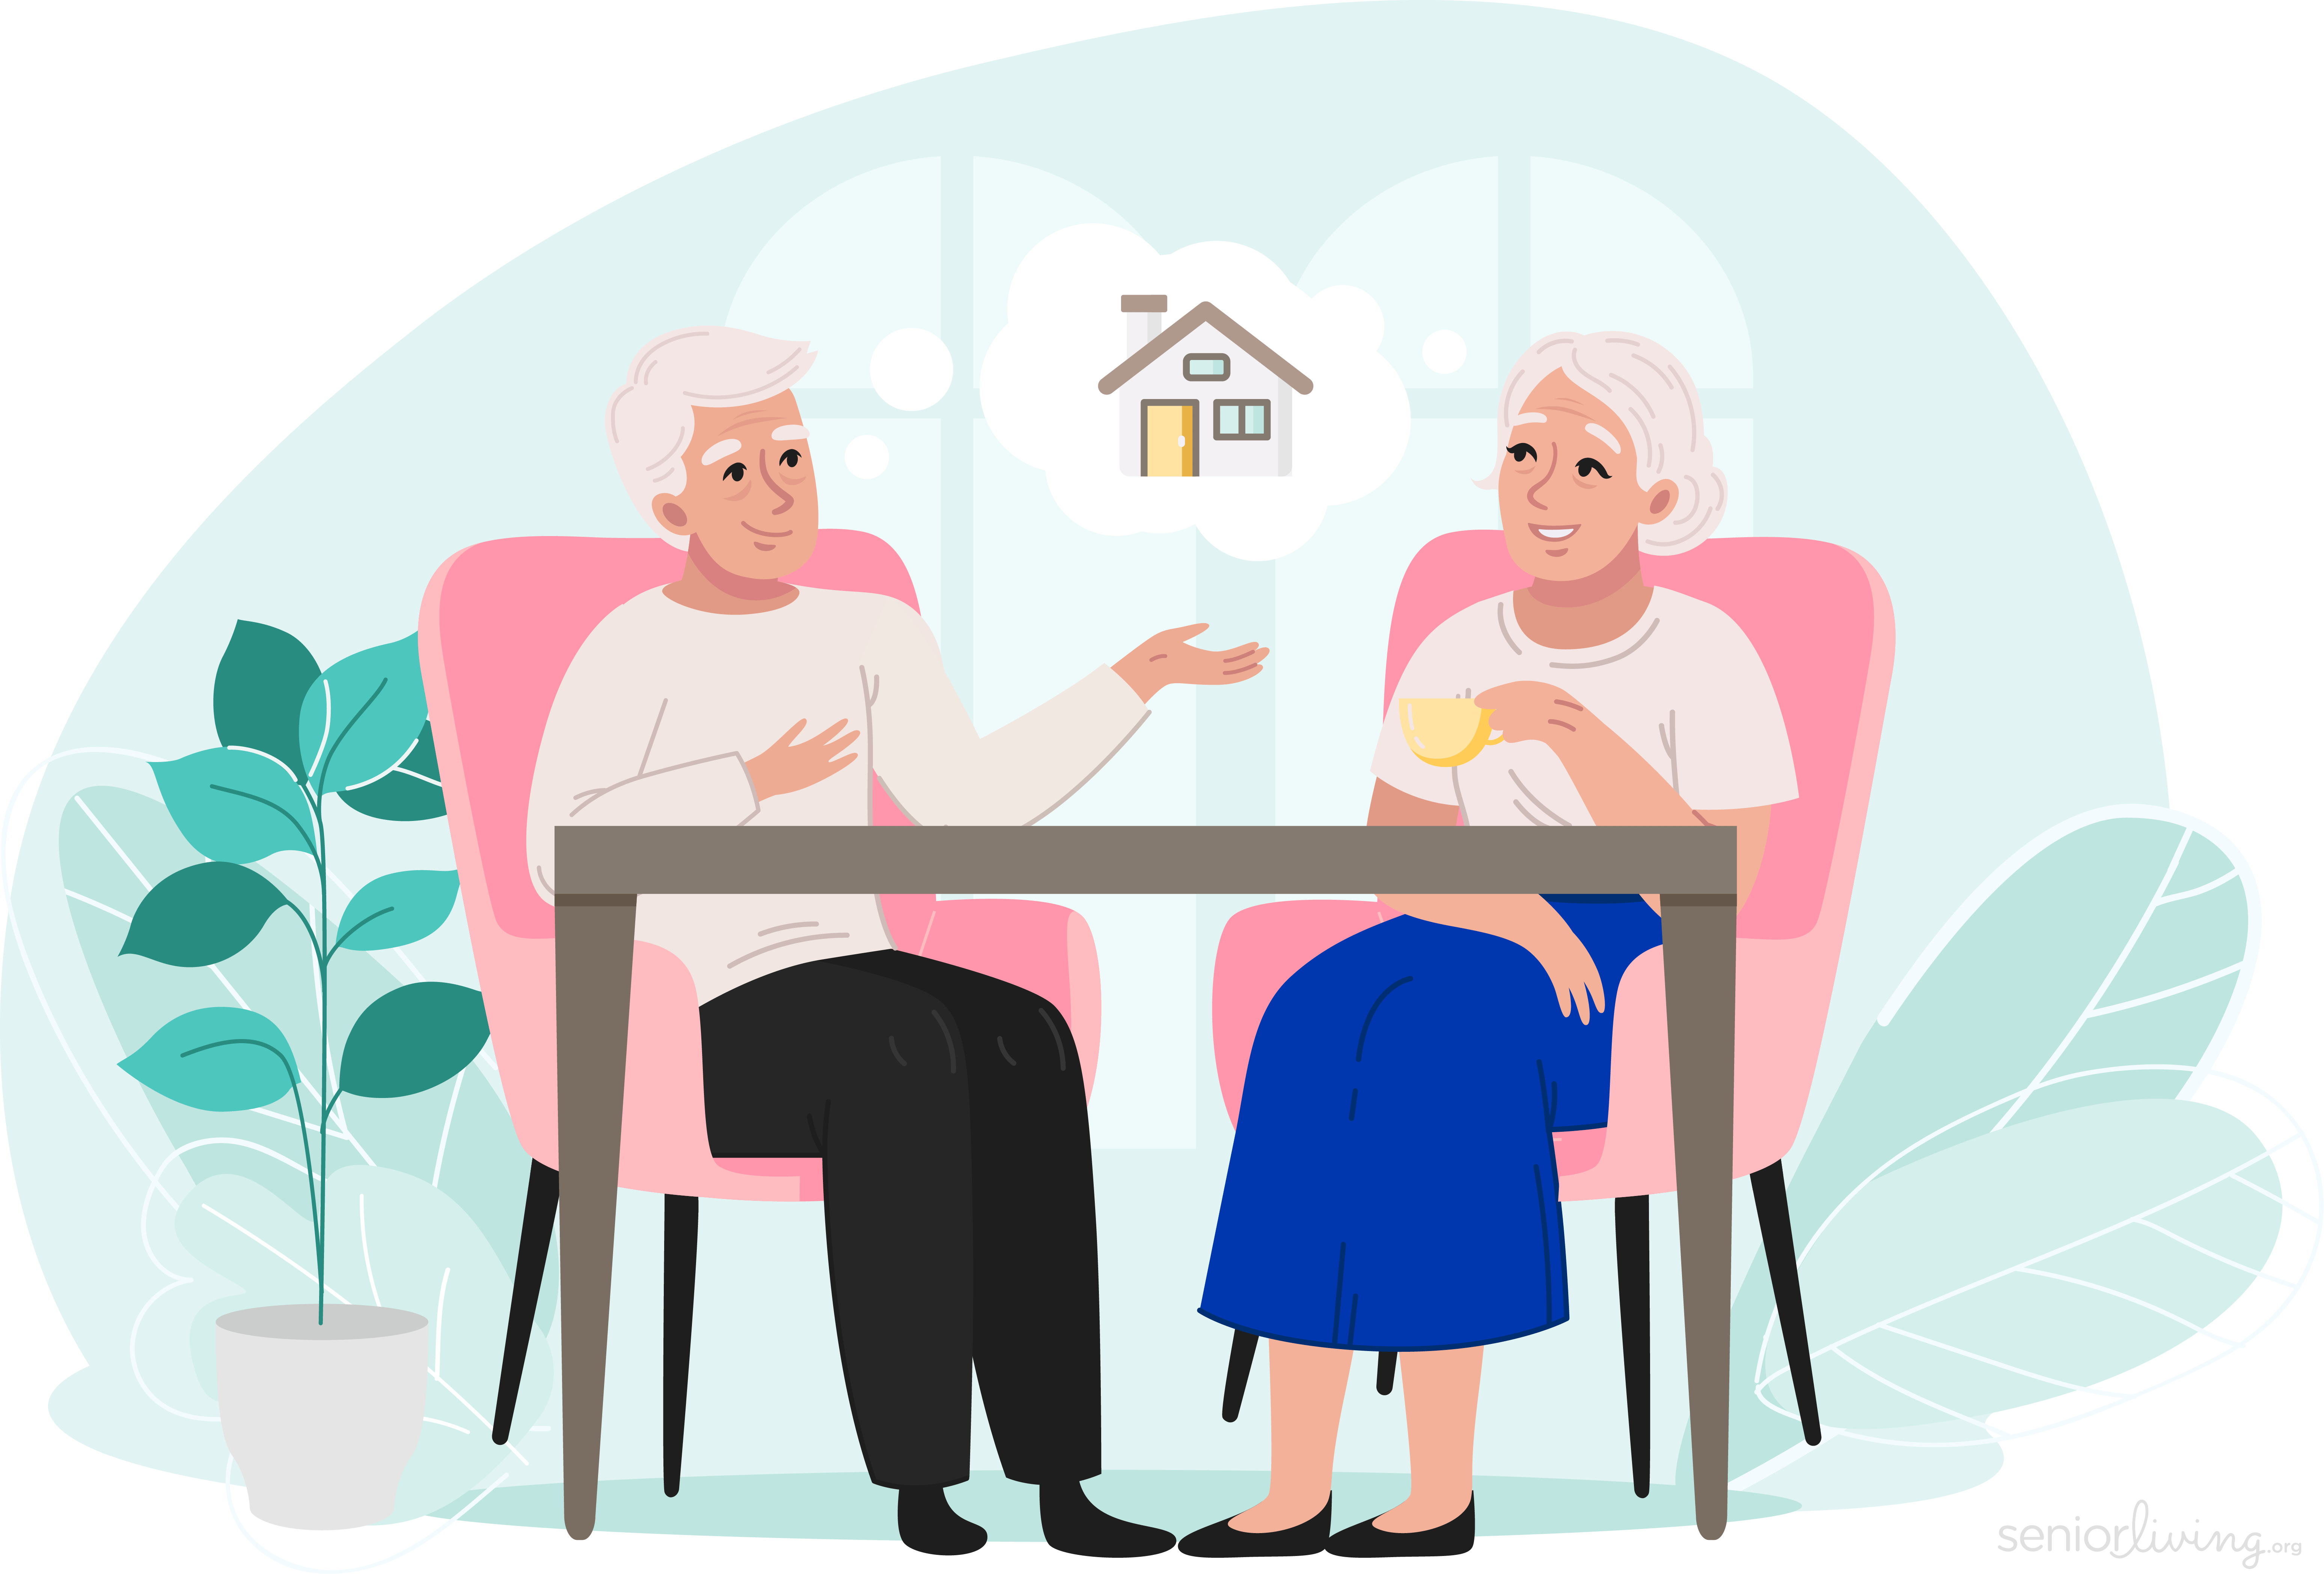 Discuss Your Vision for Retirement Housing